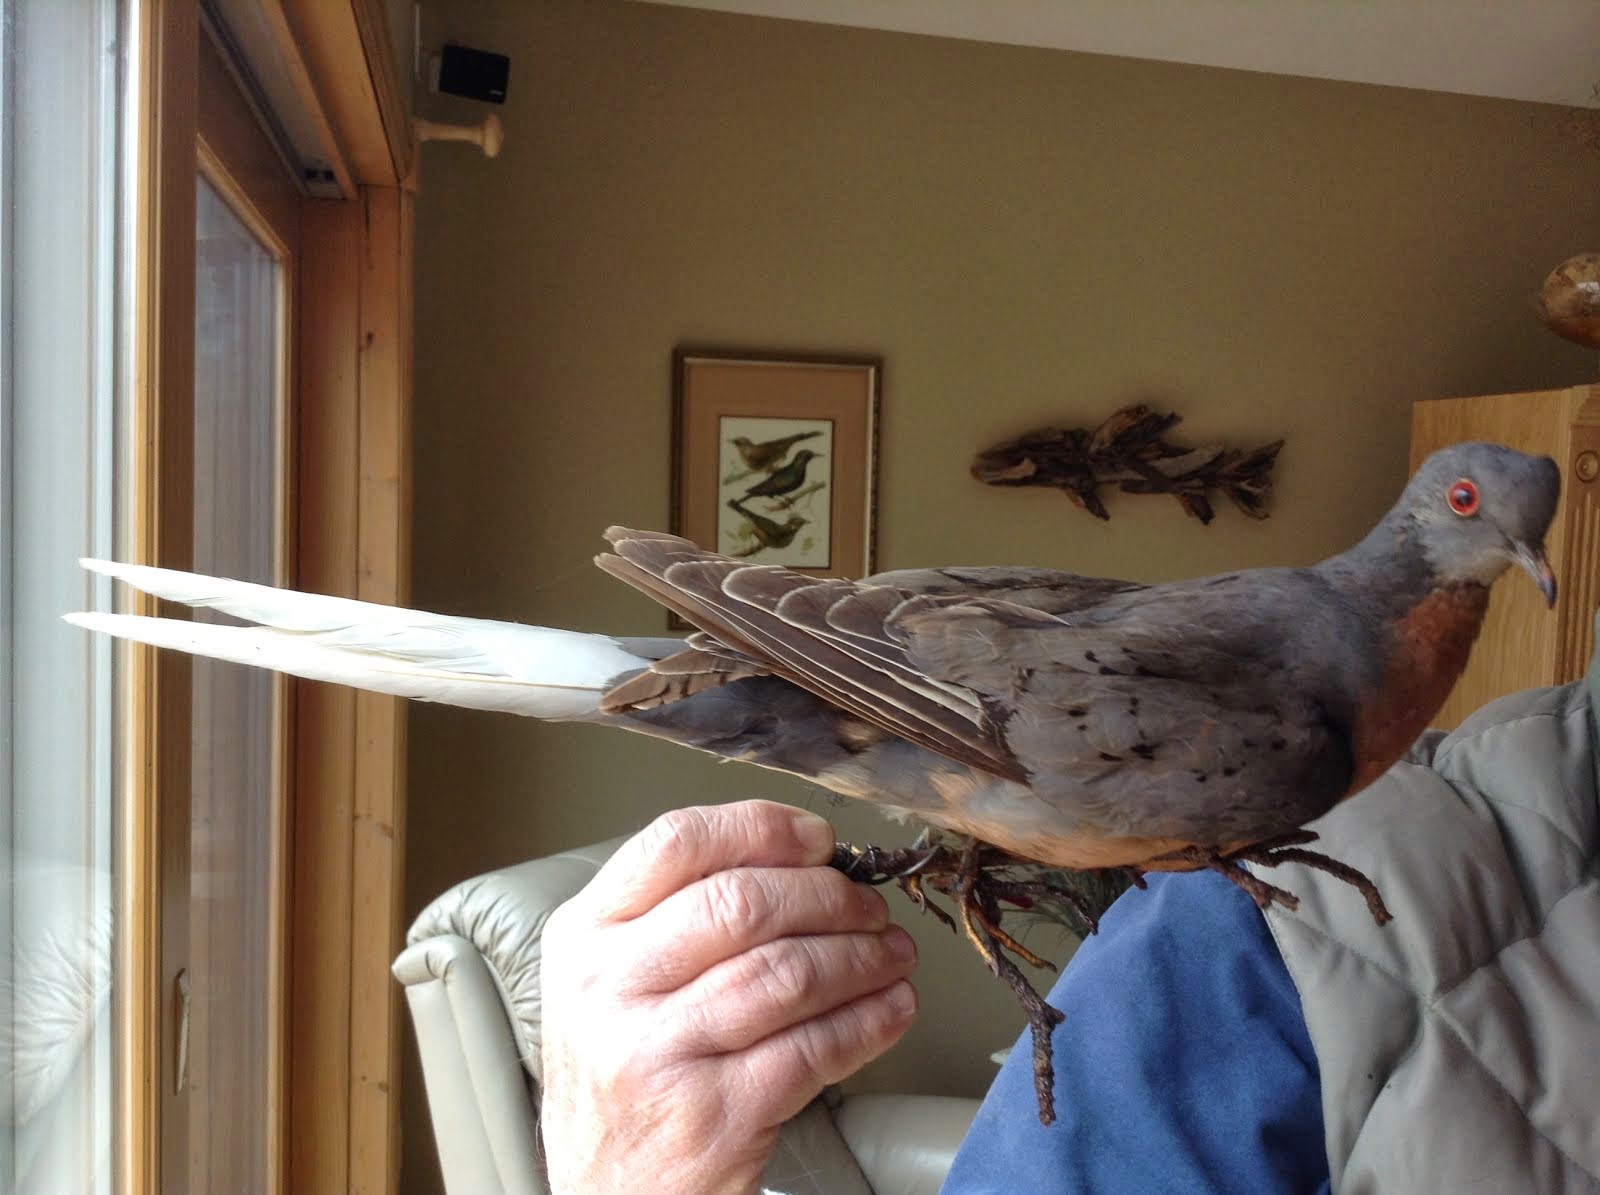 Please Donate $5.00 and help support the Passenger Pigeon Education and Photography Project